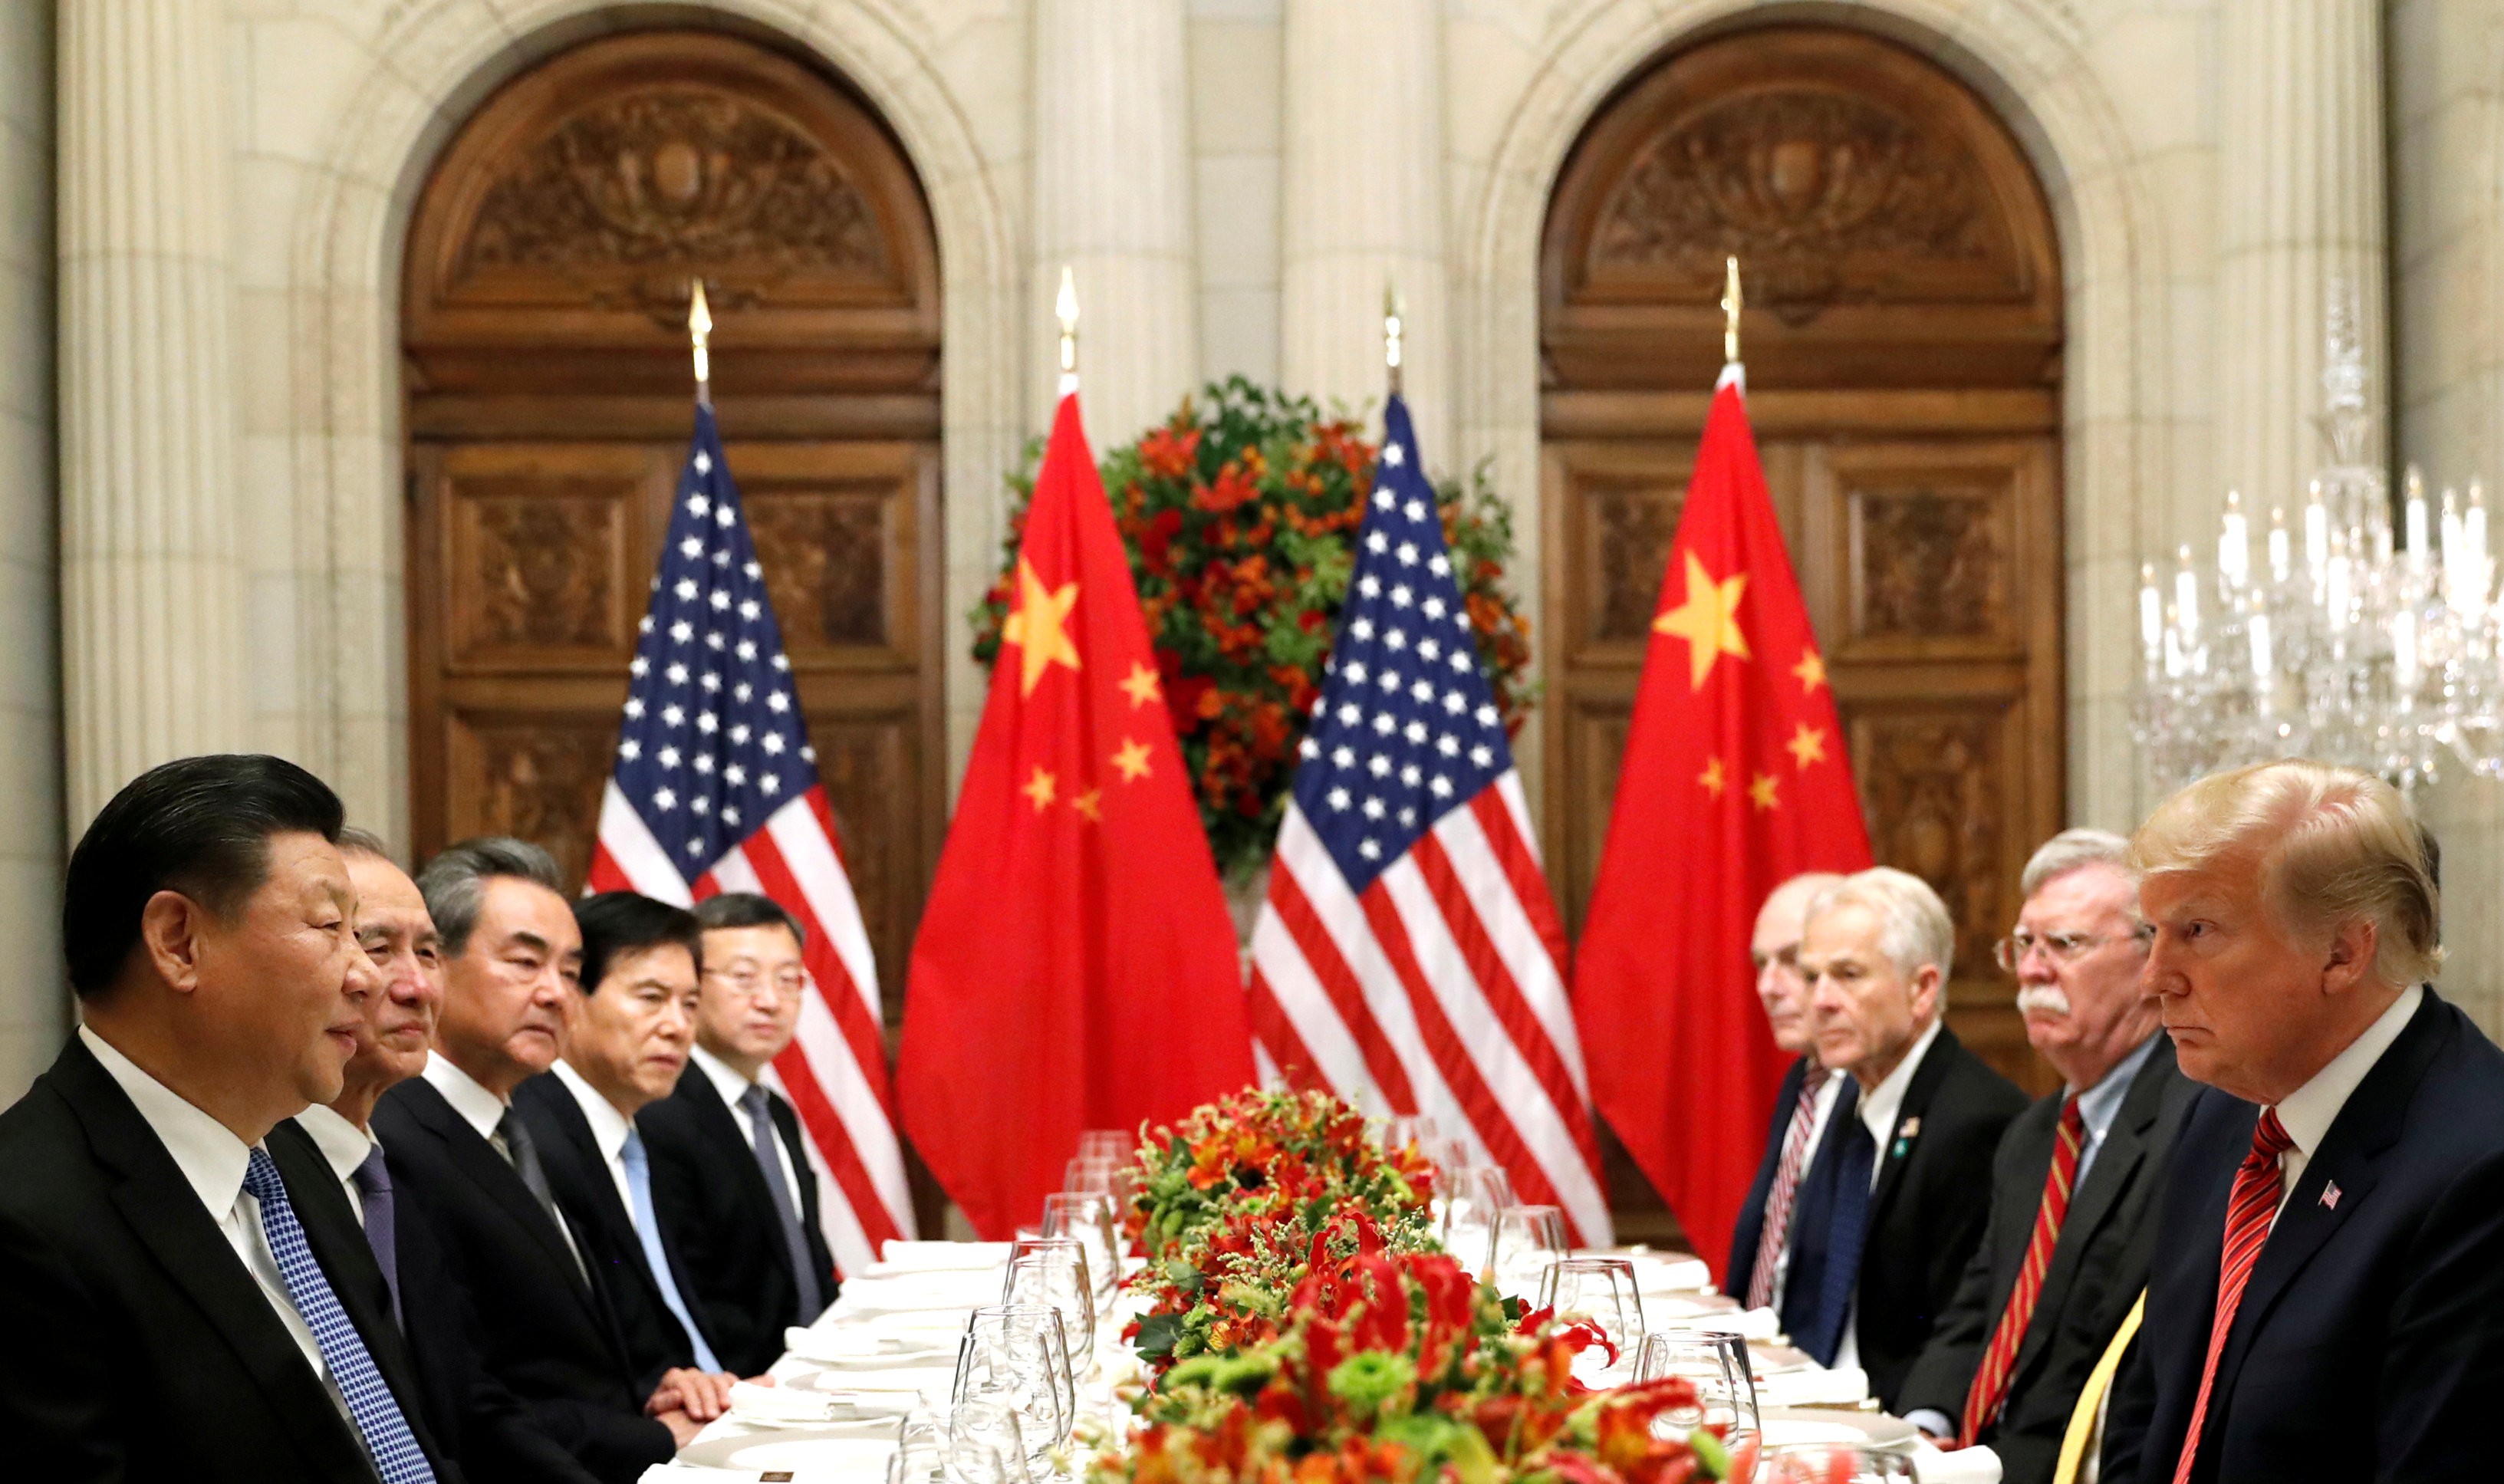 Chinese President Xi Jinping and US President Donald Trump (right) attend a working dinner after the G20 summit in Buenos Aires on December 1. Photo: Reuters